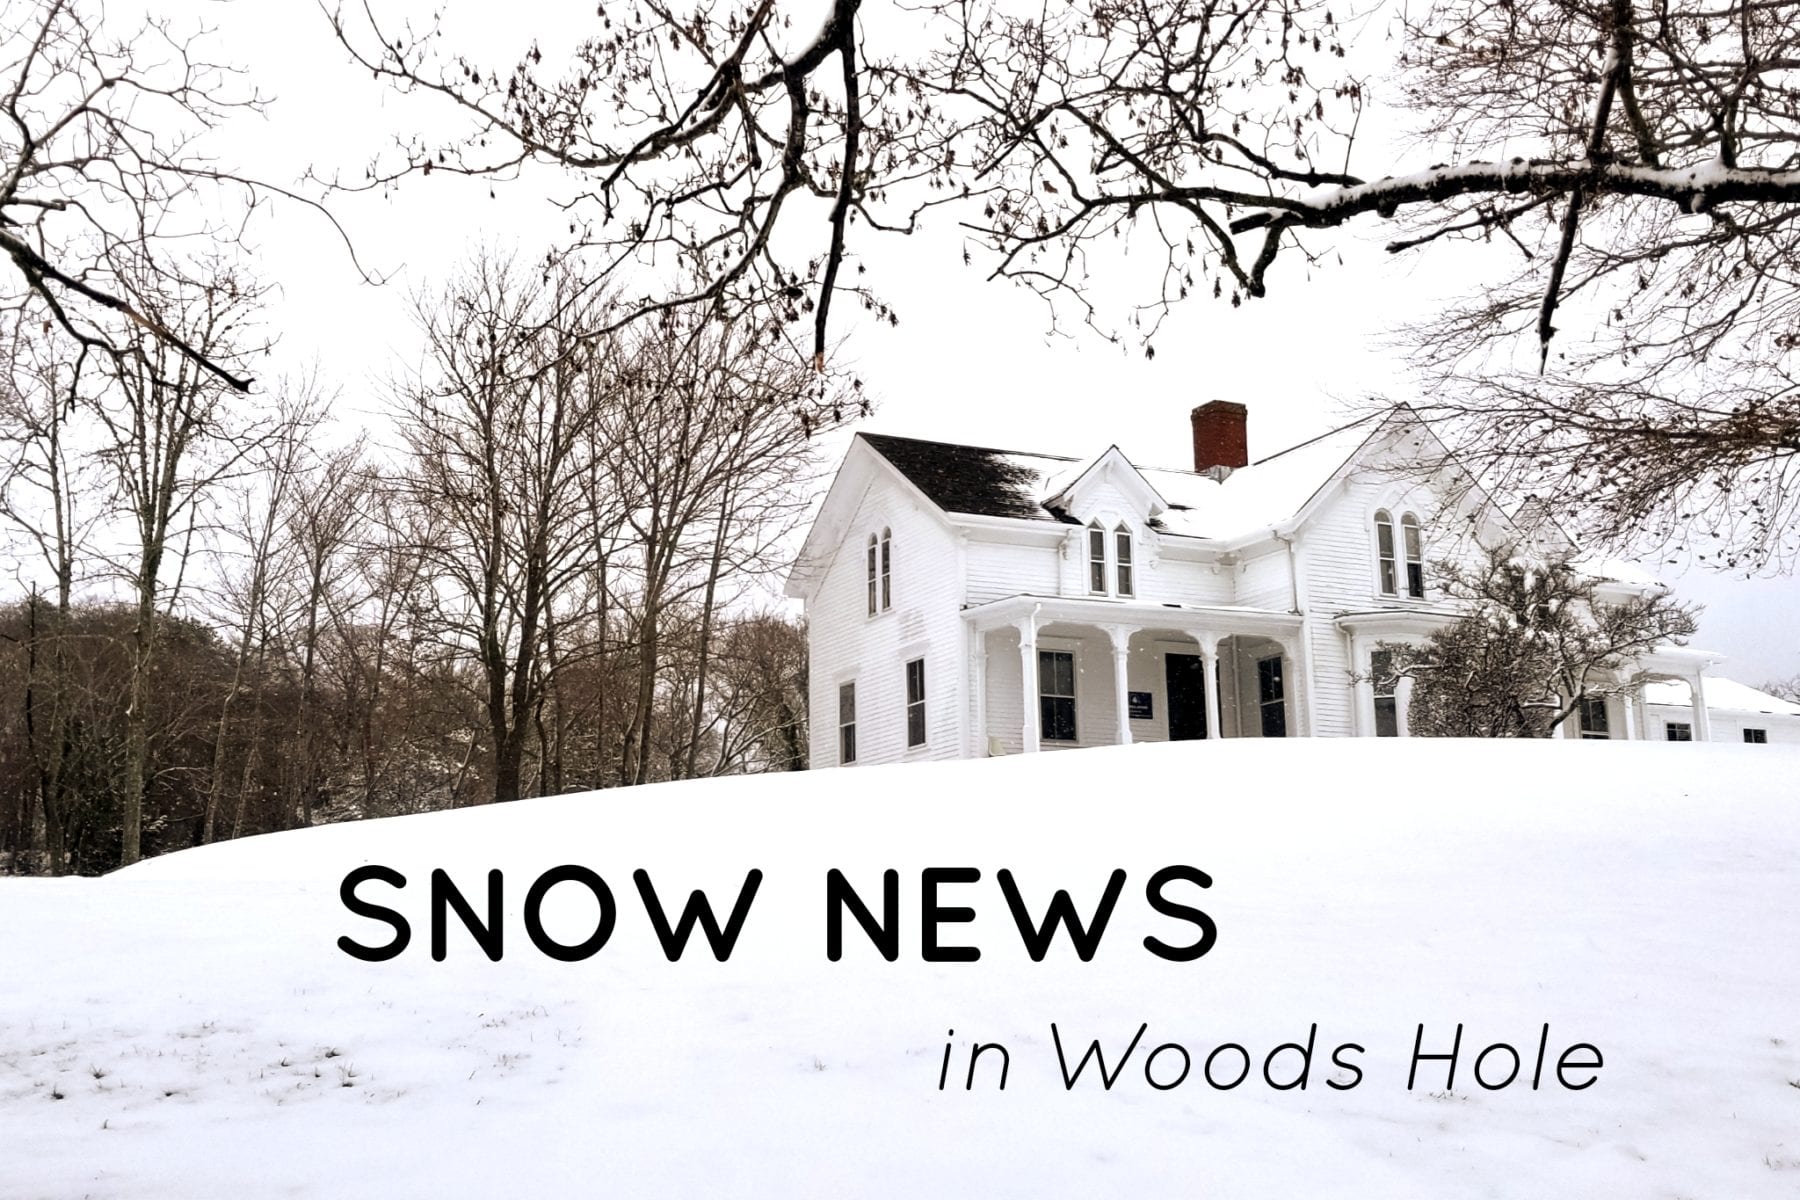 Snow News in the Hole!  December 3rd, 2019 New England Storm brings Cape Cod an early glimpse of winter